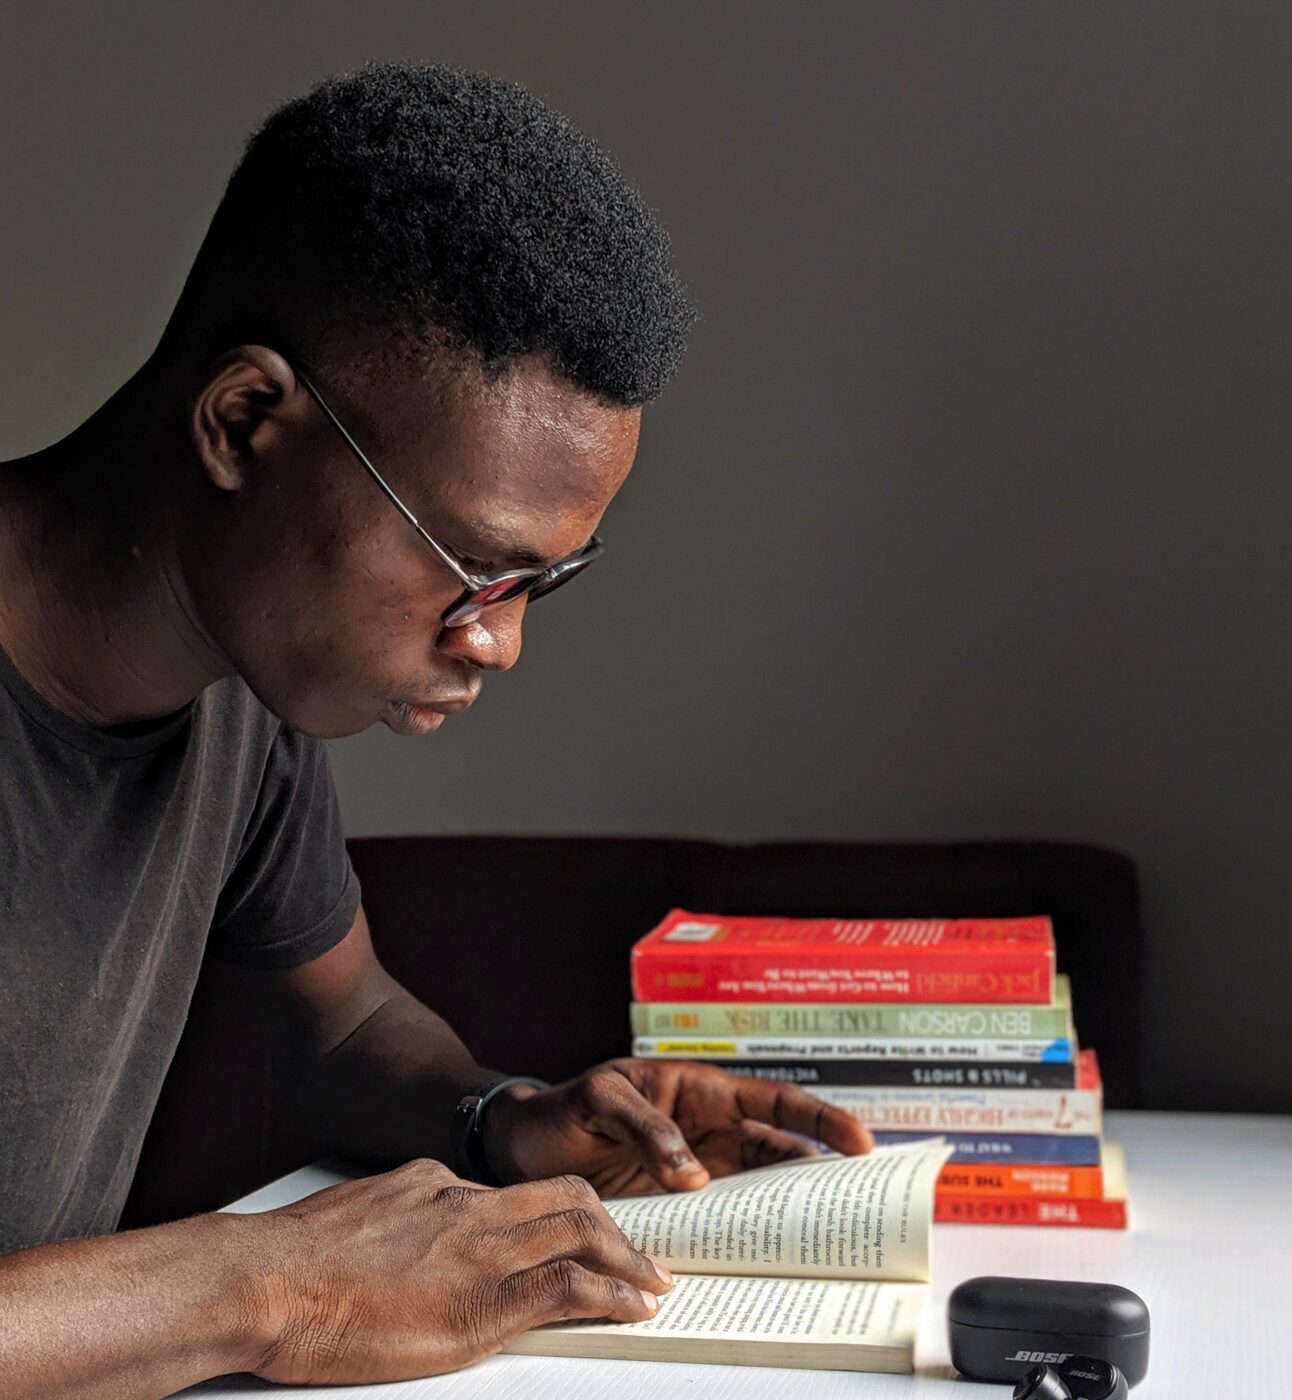 A young person studying